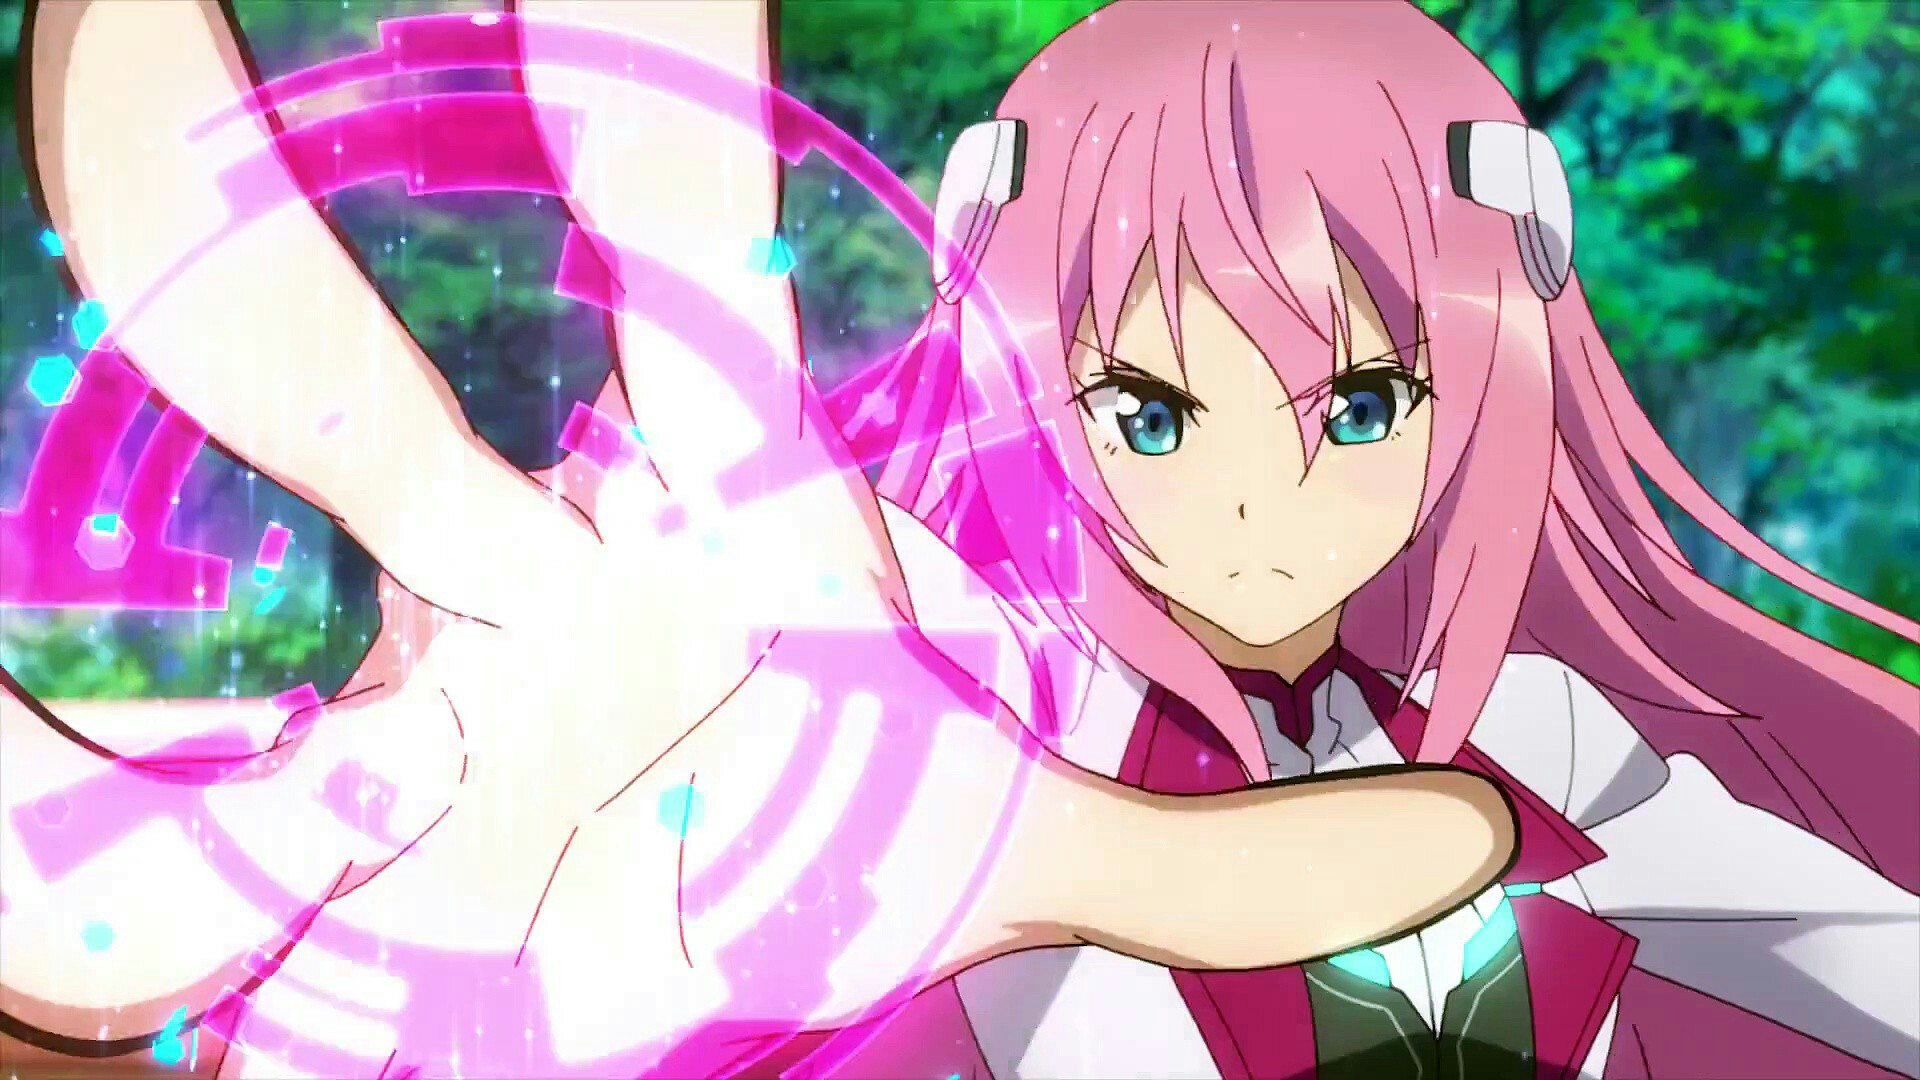 The Asterisk War Season 3 Coming Early